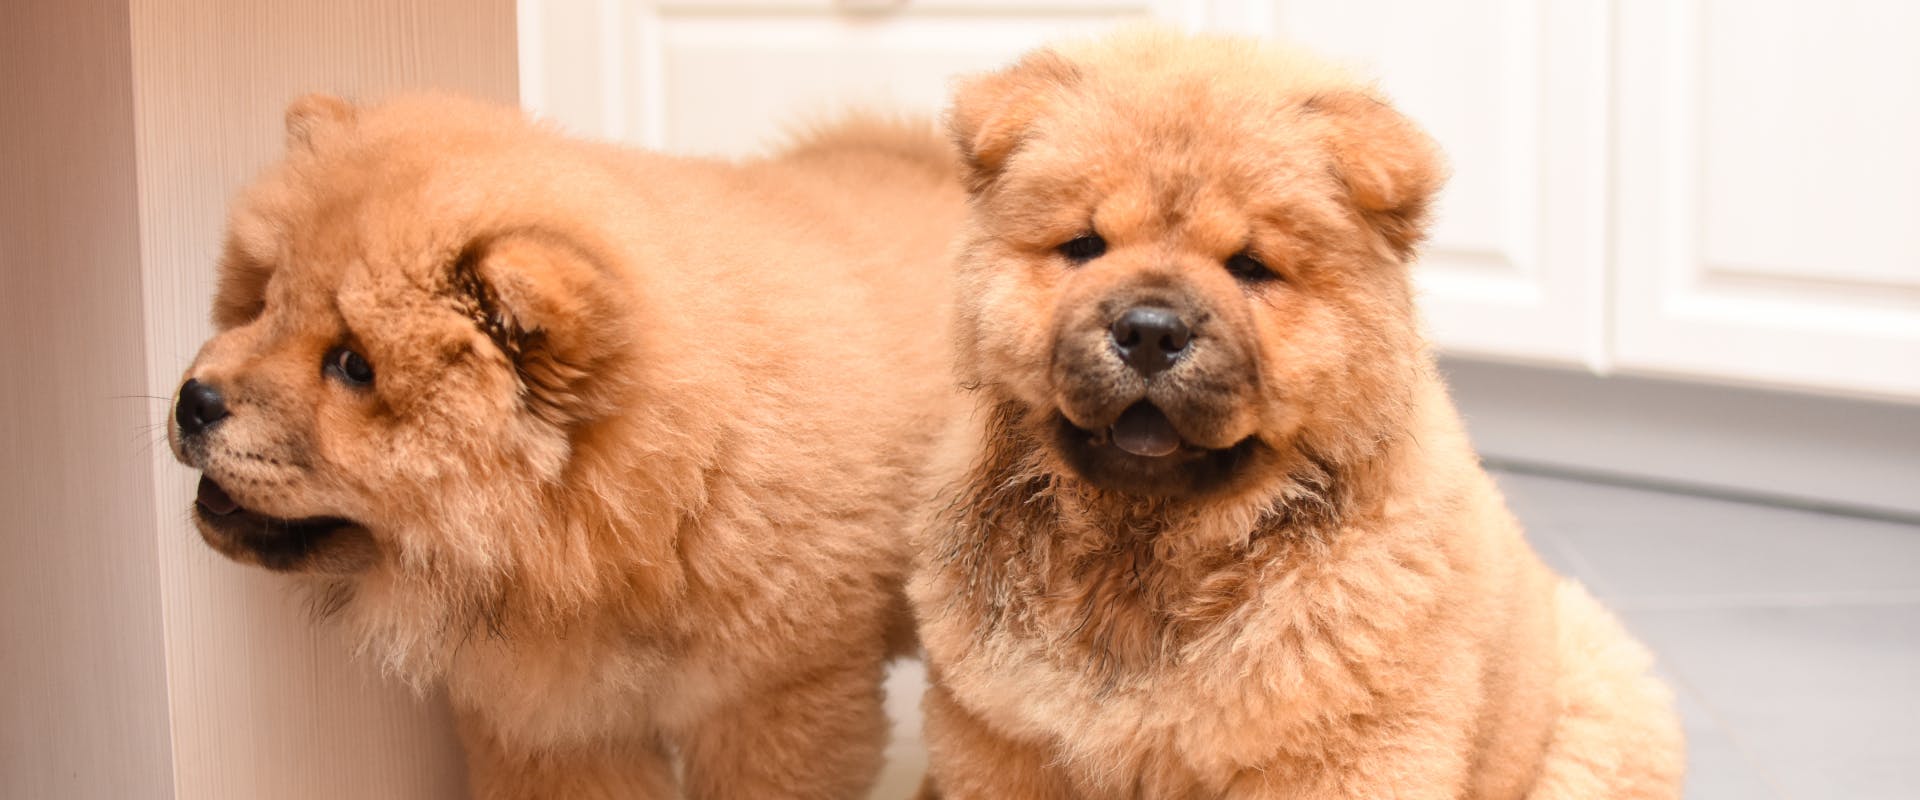 two chow chow puppies stood and sat in a kitchen doorway